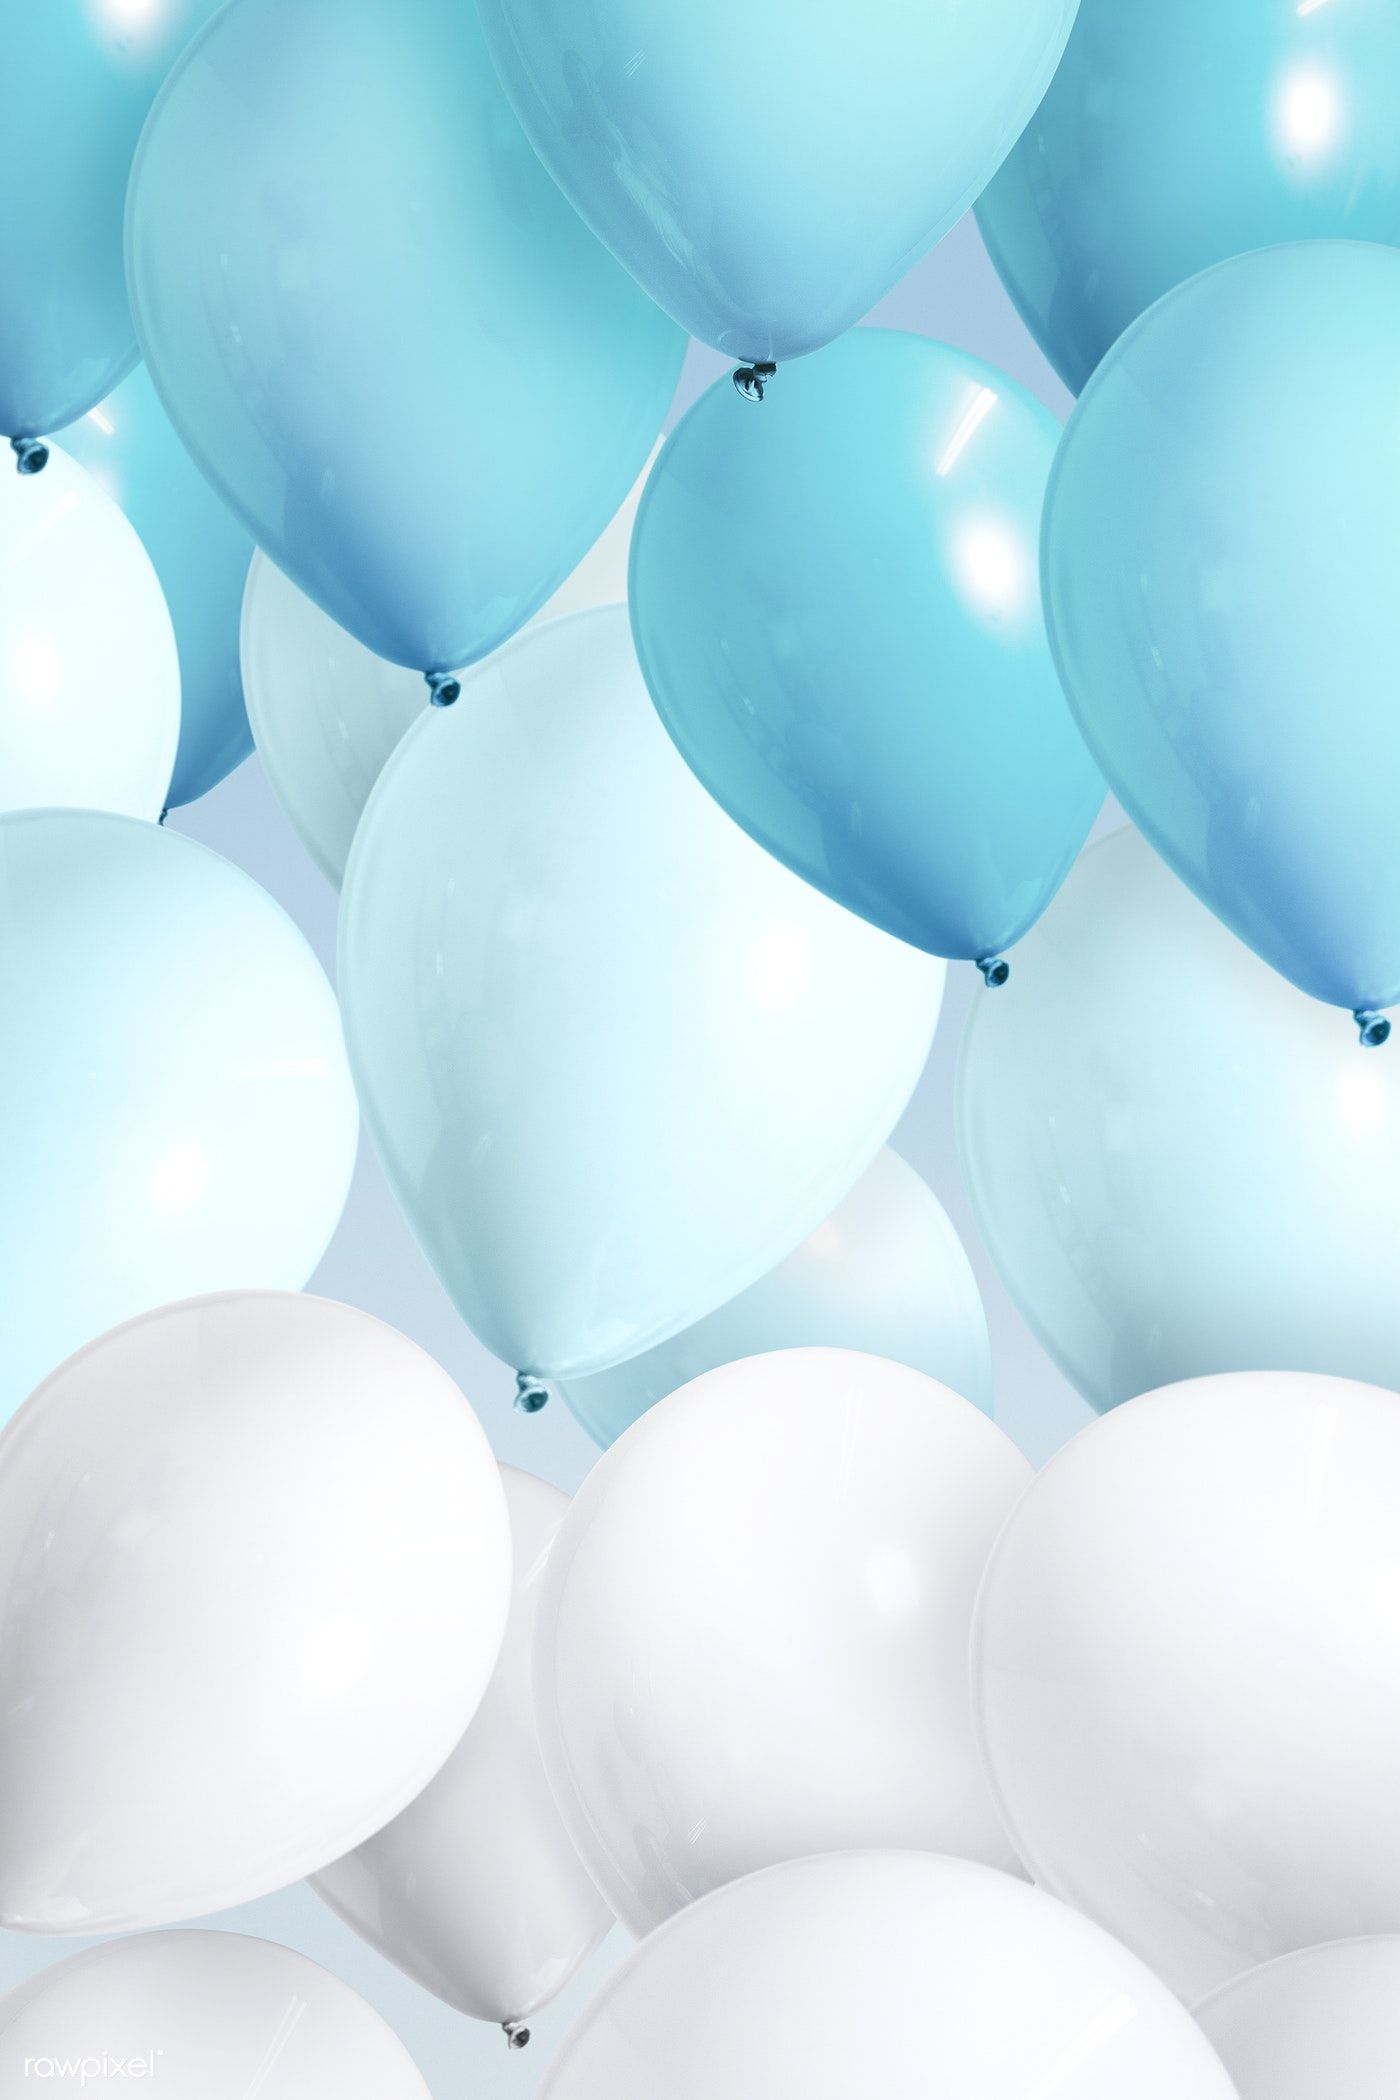 🔥 Download Premium Illustration Of Pastel Blue Balloons Wallpaper By Michealmoore Balloons